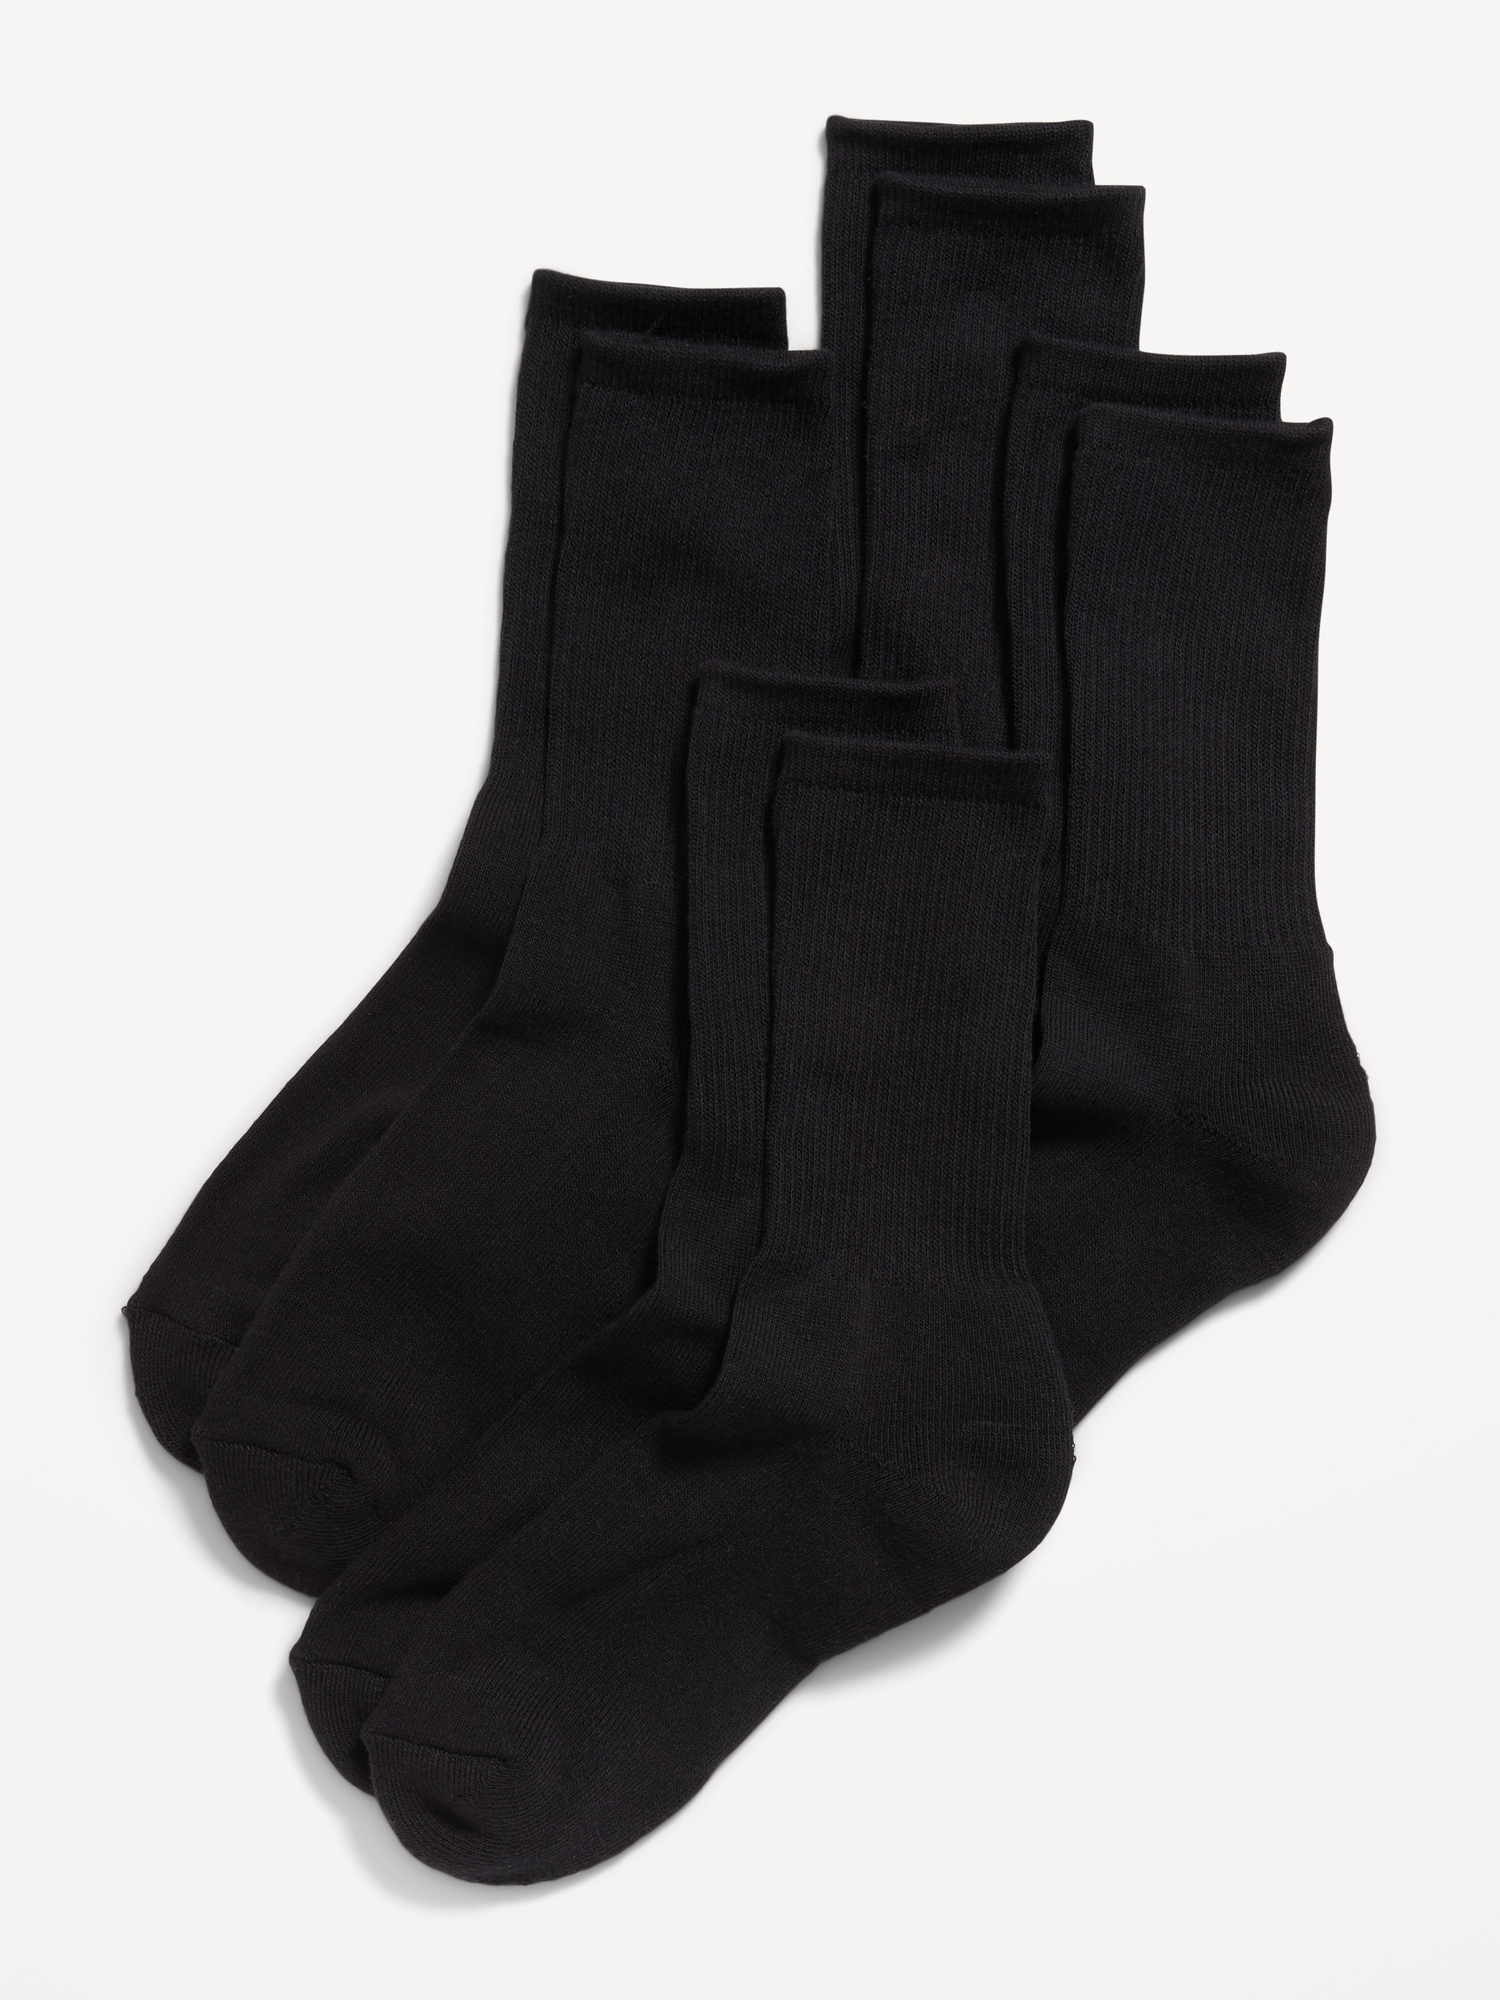  5 Pairs Comfortable and Warm Vintage Crew Socks for